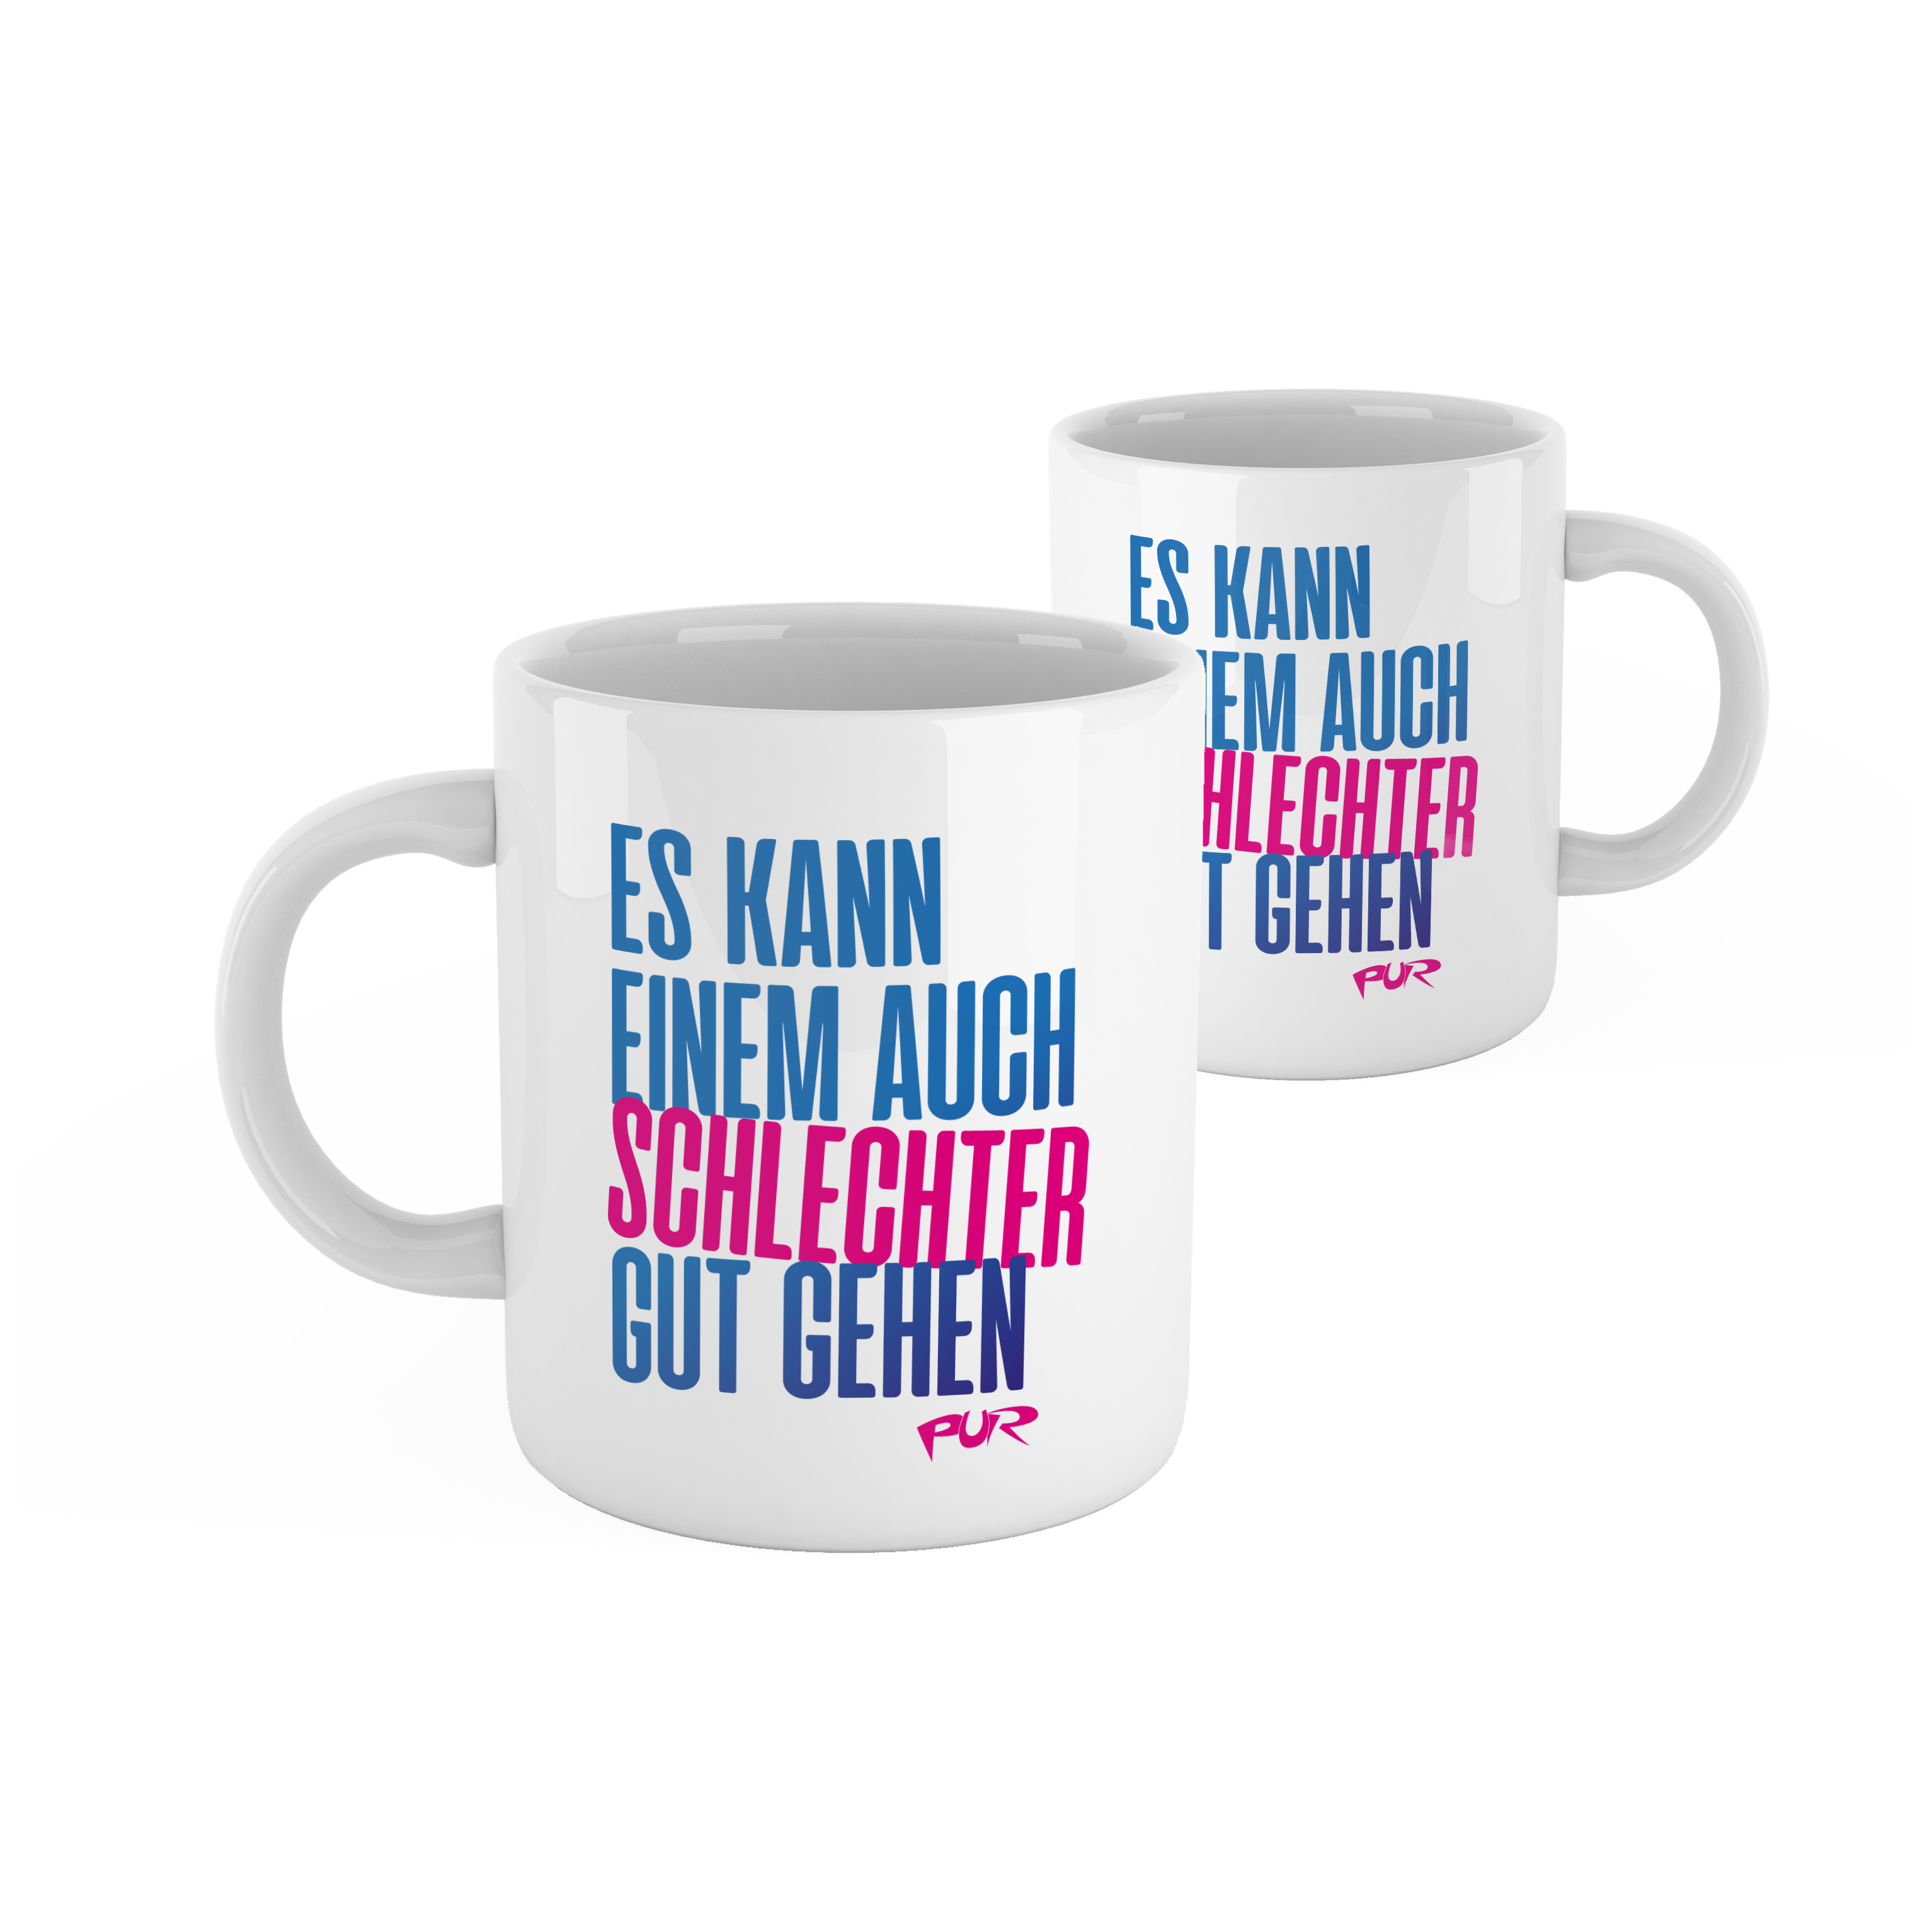 https://images.bravado.de/prod/product-assets/pur/pur/products/503840/web/391371/image-thumb__391371__3000x3000_original/Pur-Gut-Gehen-Tasse-weiss-503840-391371.e1eeed24.png